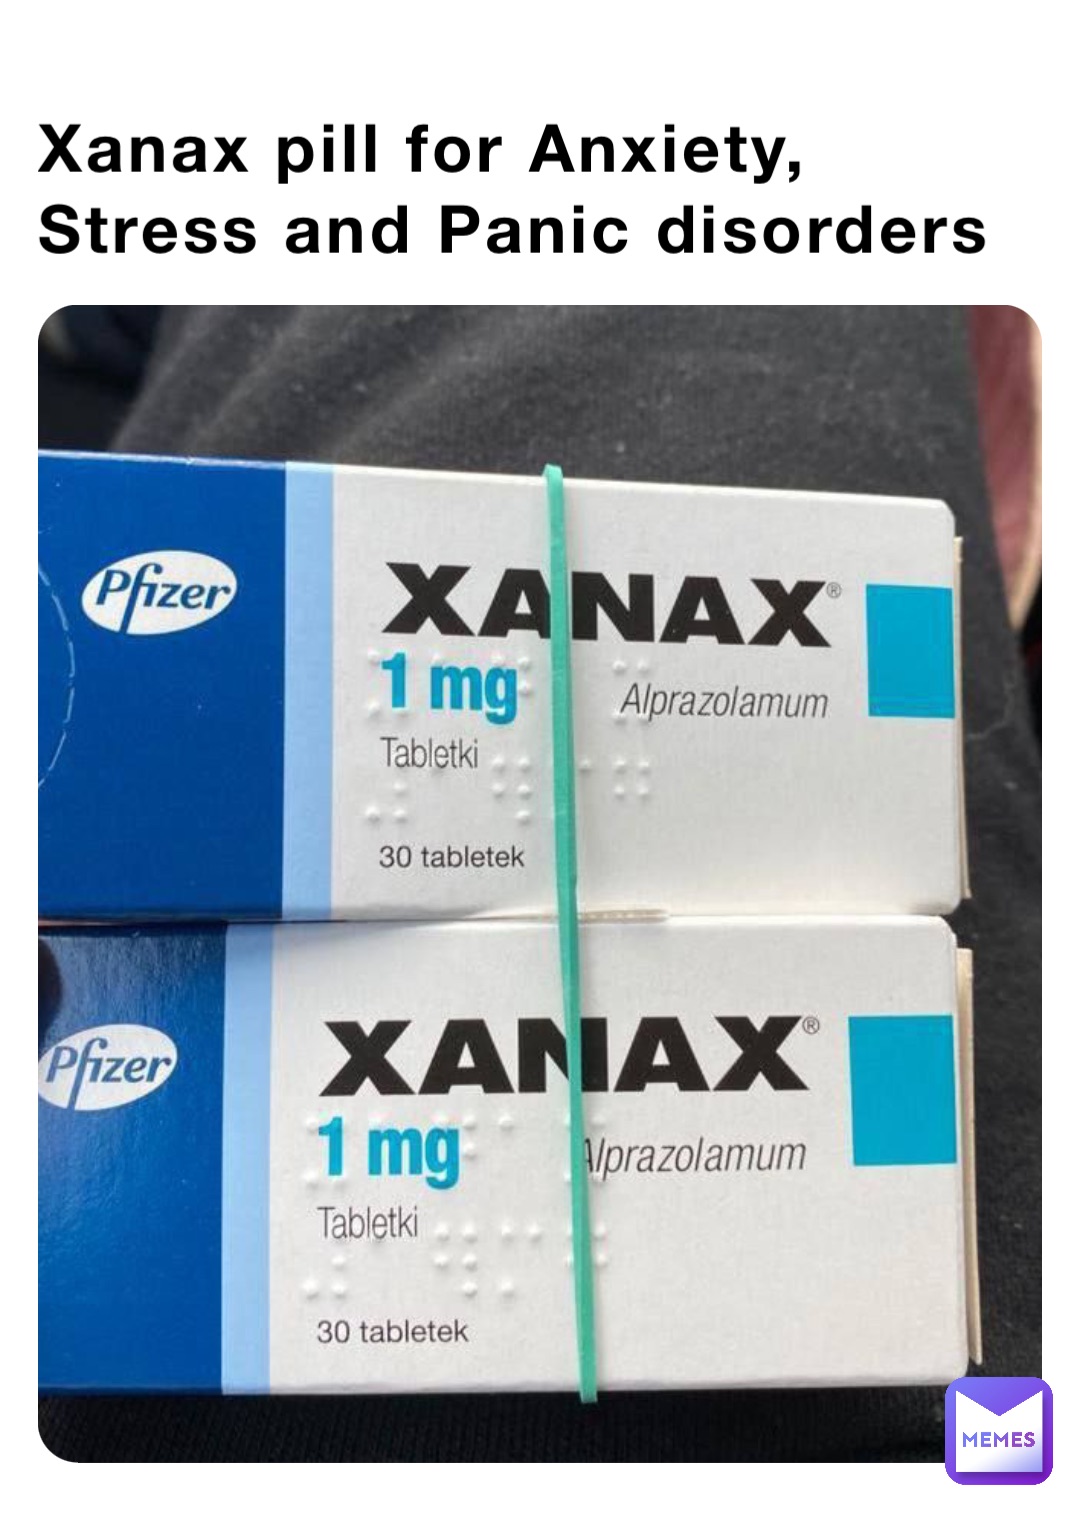 Xanax pill for Anxiety, Stress and Panic disorders